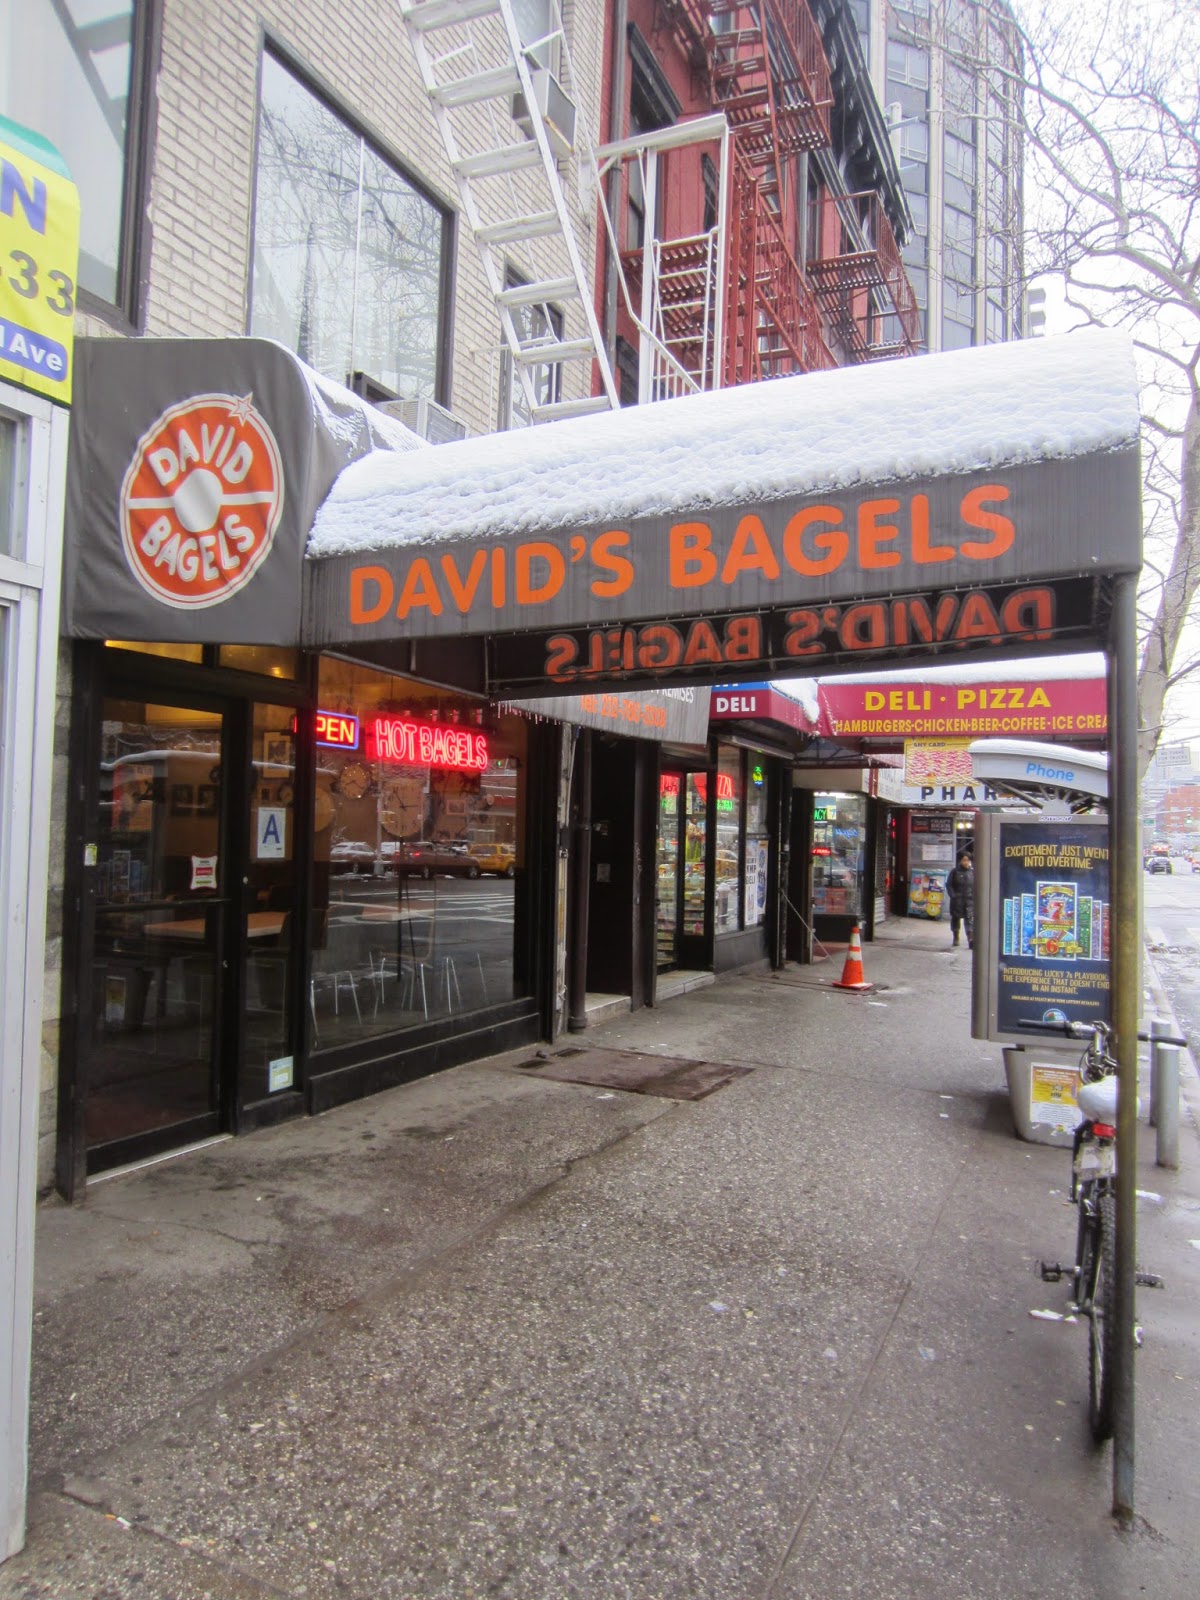 Ev Grieve Updated Ess A Bagel Has Closed For Now On 1st Avenue